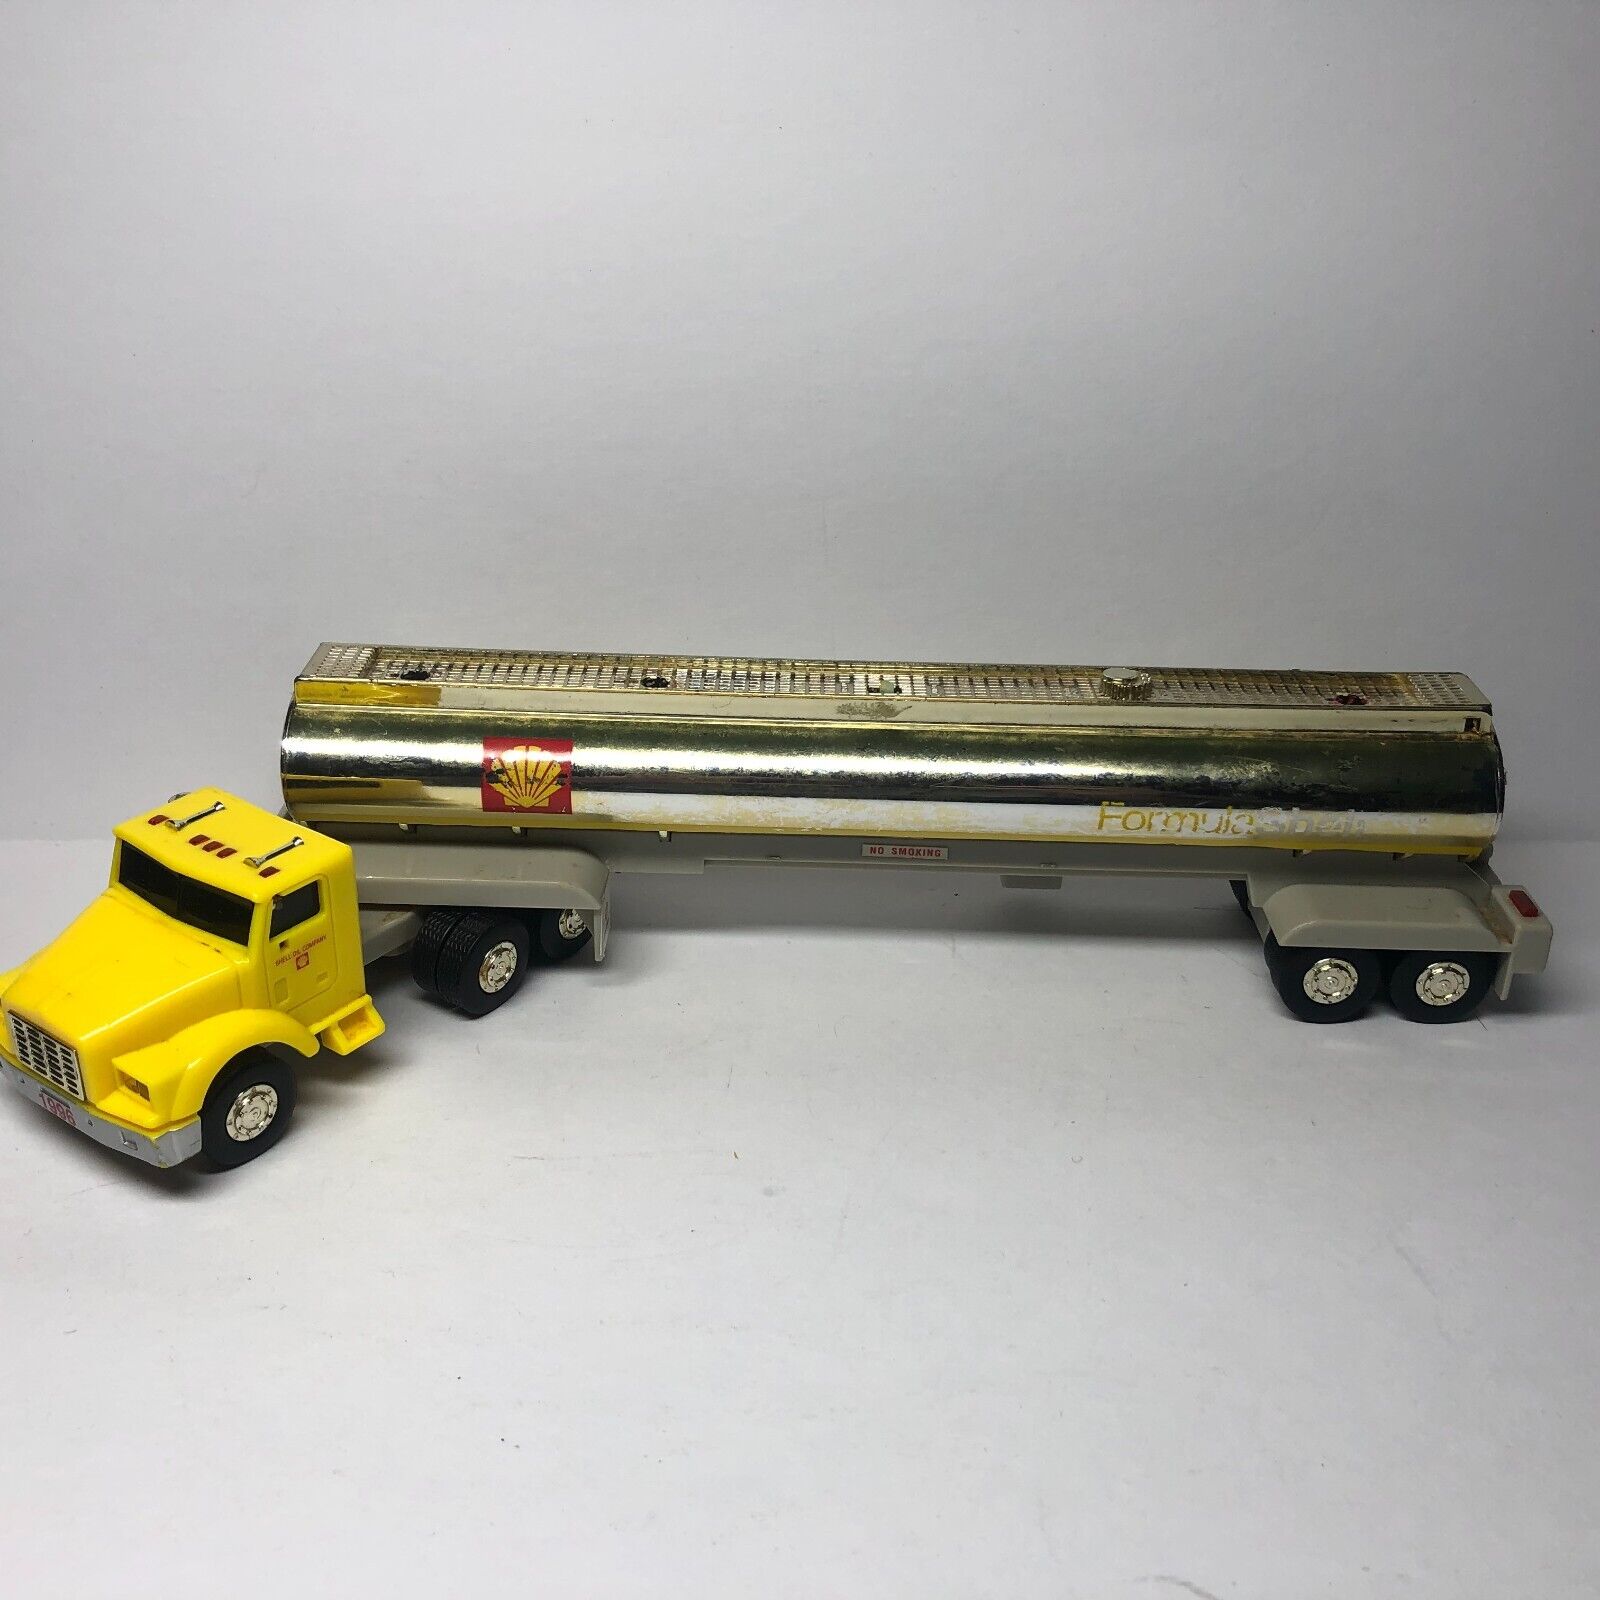 Shell 1996 Fuel Chrome Tanker Truck - 18 Wheeler Tractor Vintage - Tested